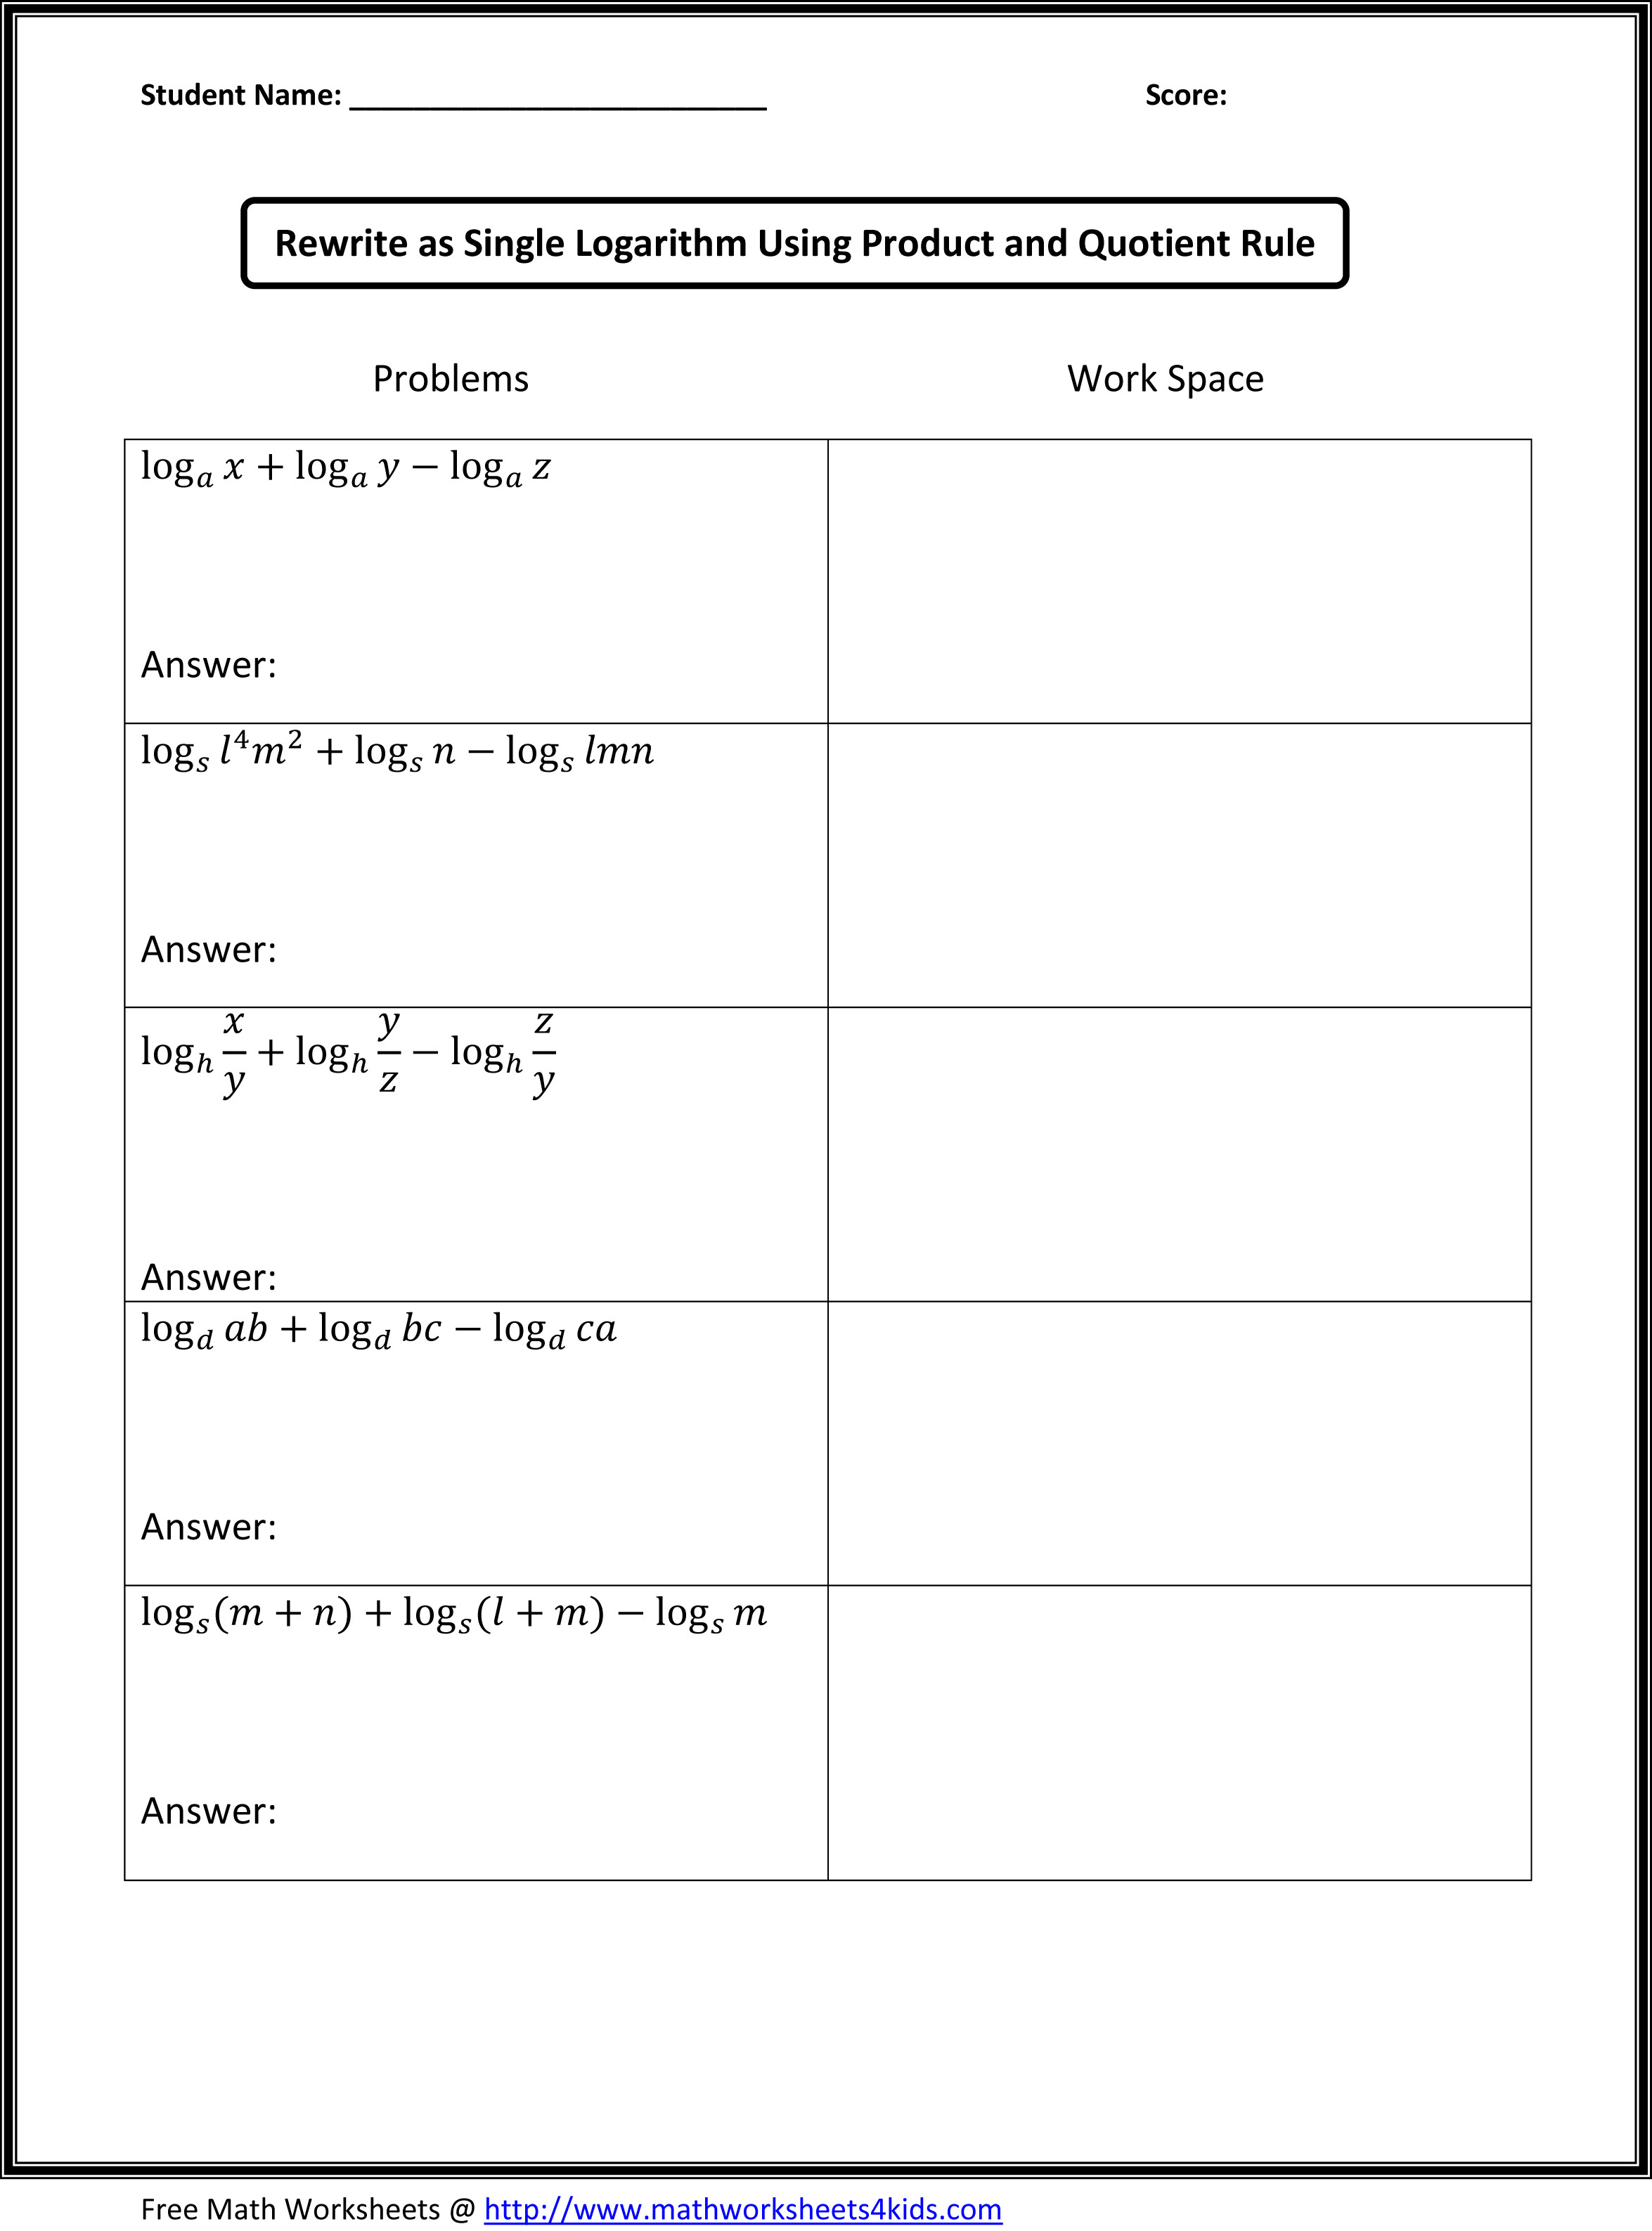 9Th Grade Math Worksheets With Answer Key | db-excel.com